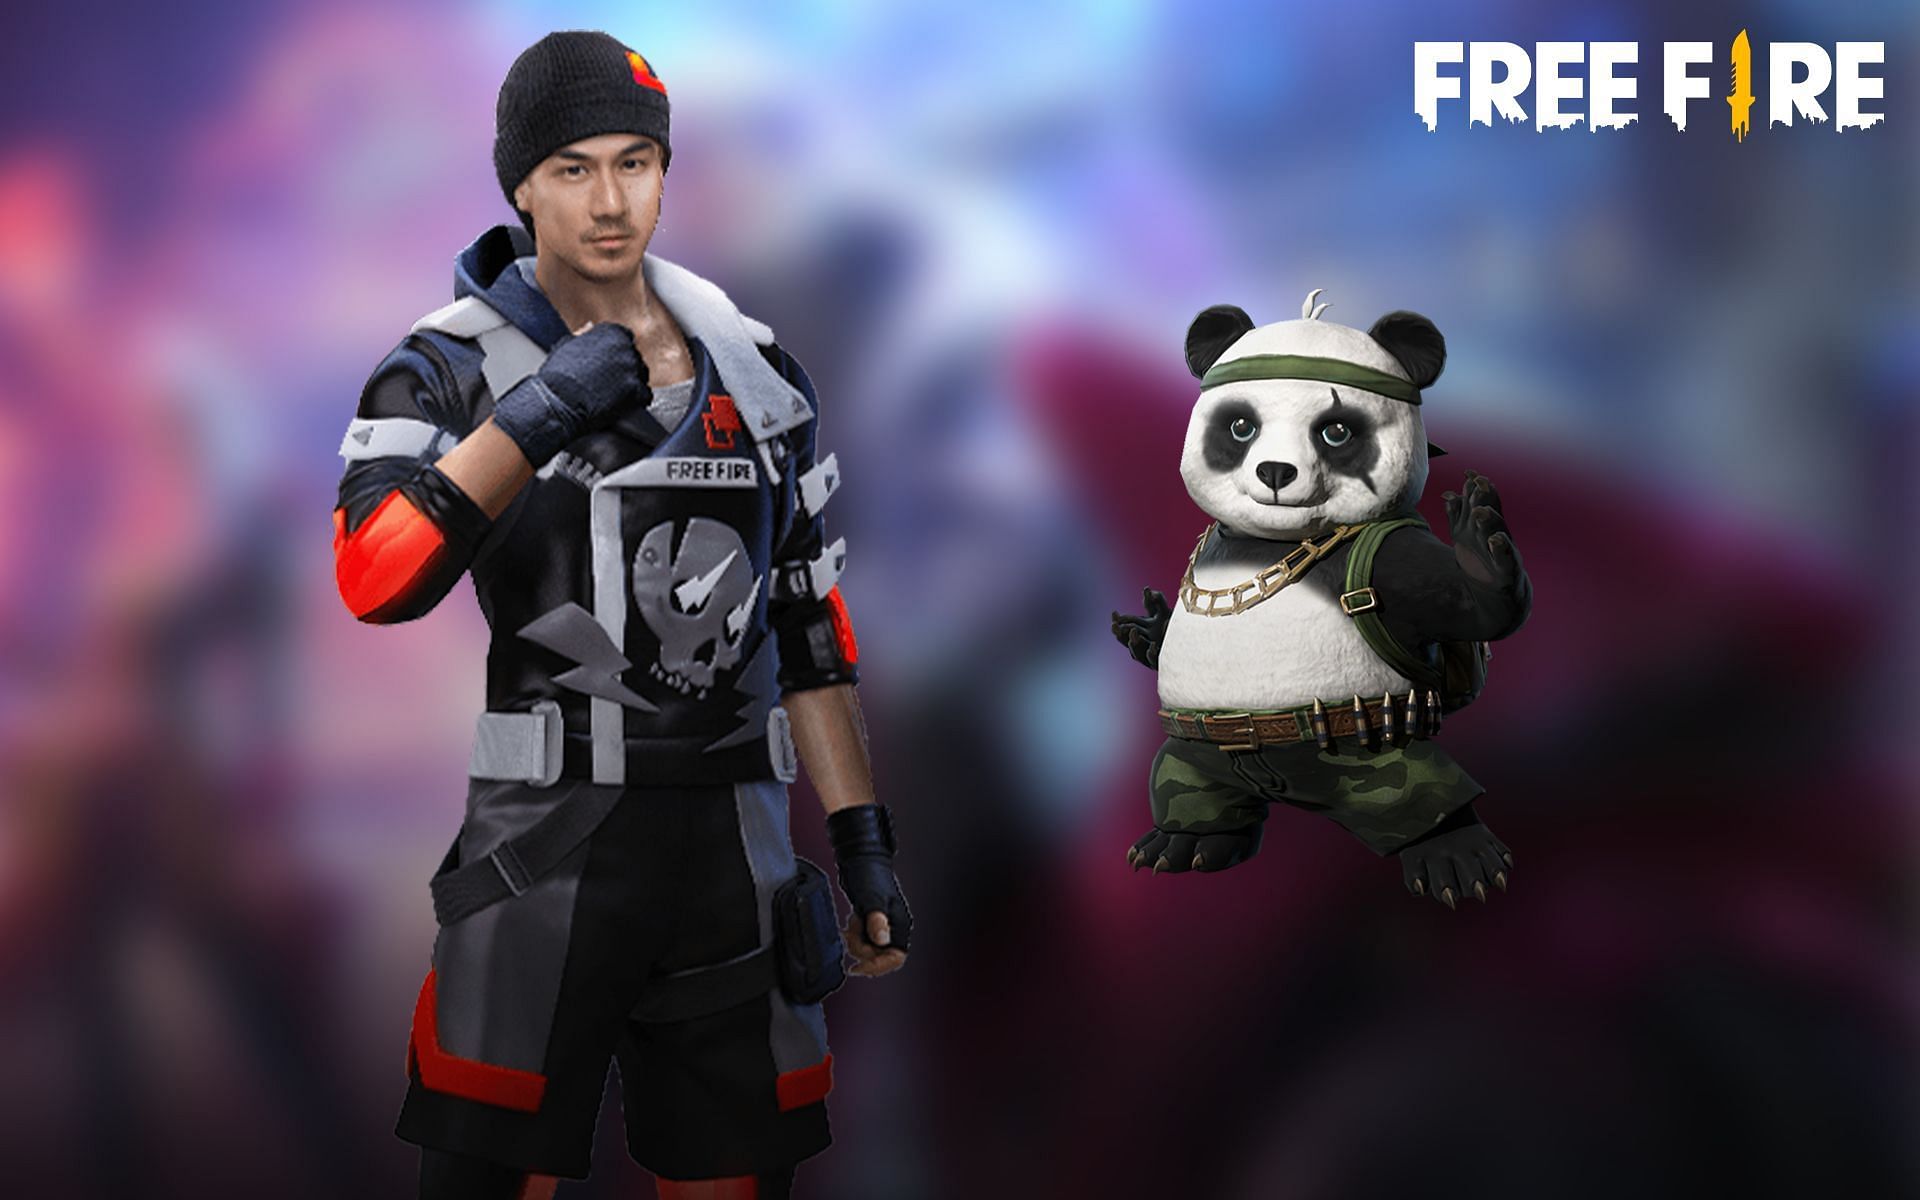 Character and pet combinations can help players in Free Fire (Image via Sportskeeda)